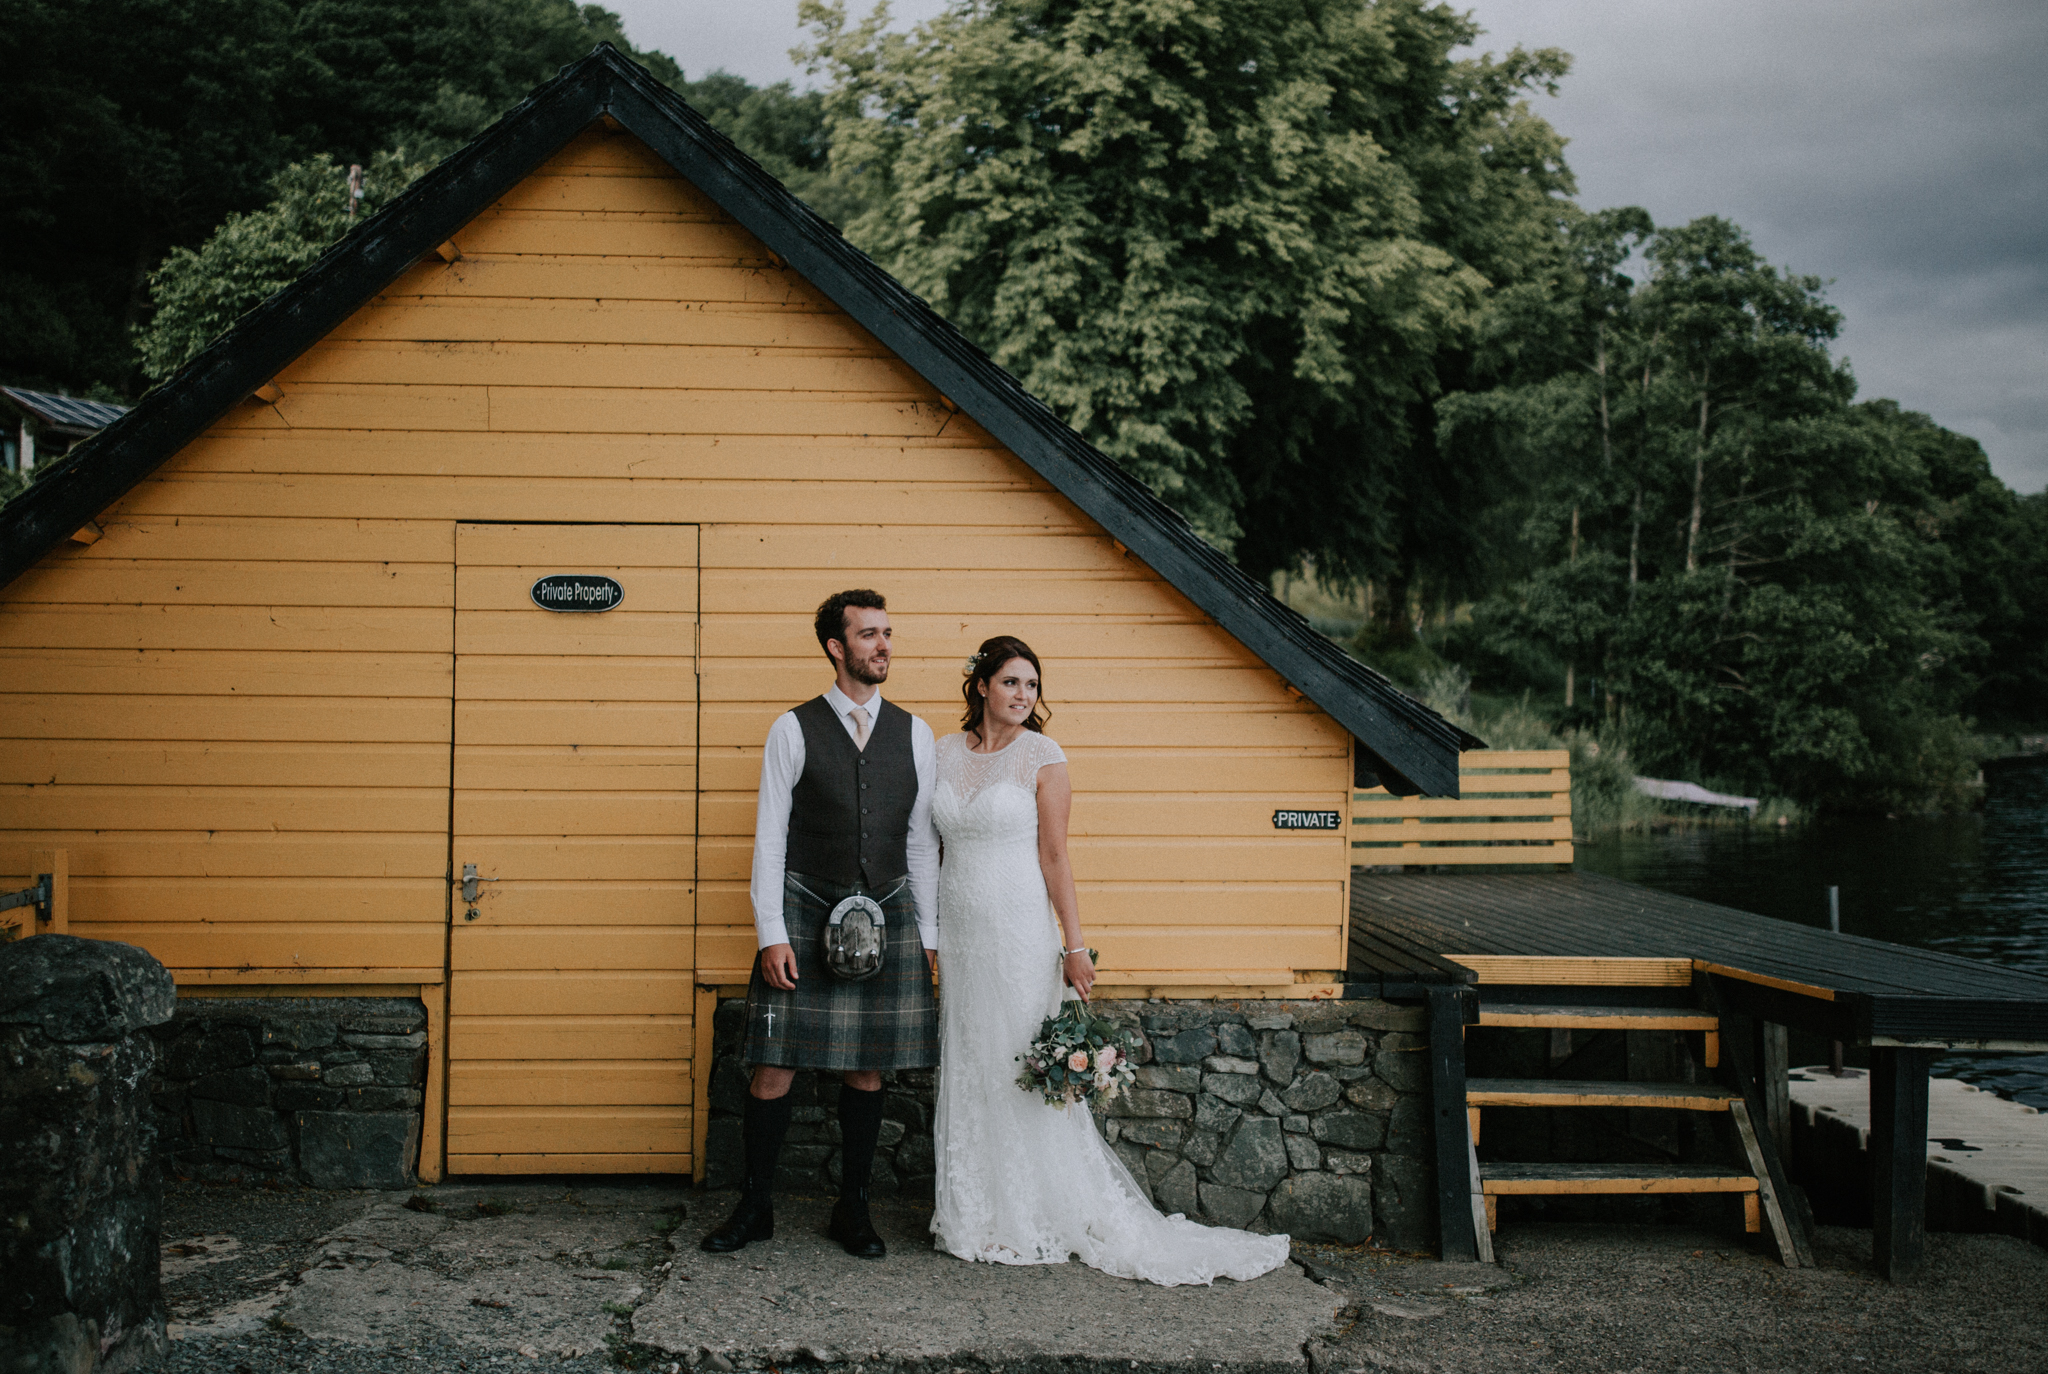 A Beautiful Sottero & Midgley Gown for a Laid Back Scottish Wedding